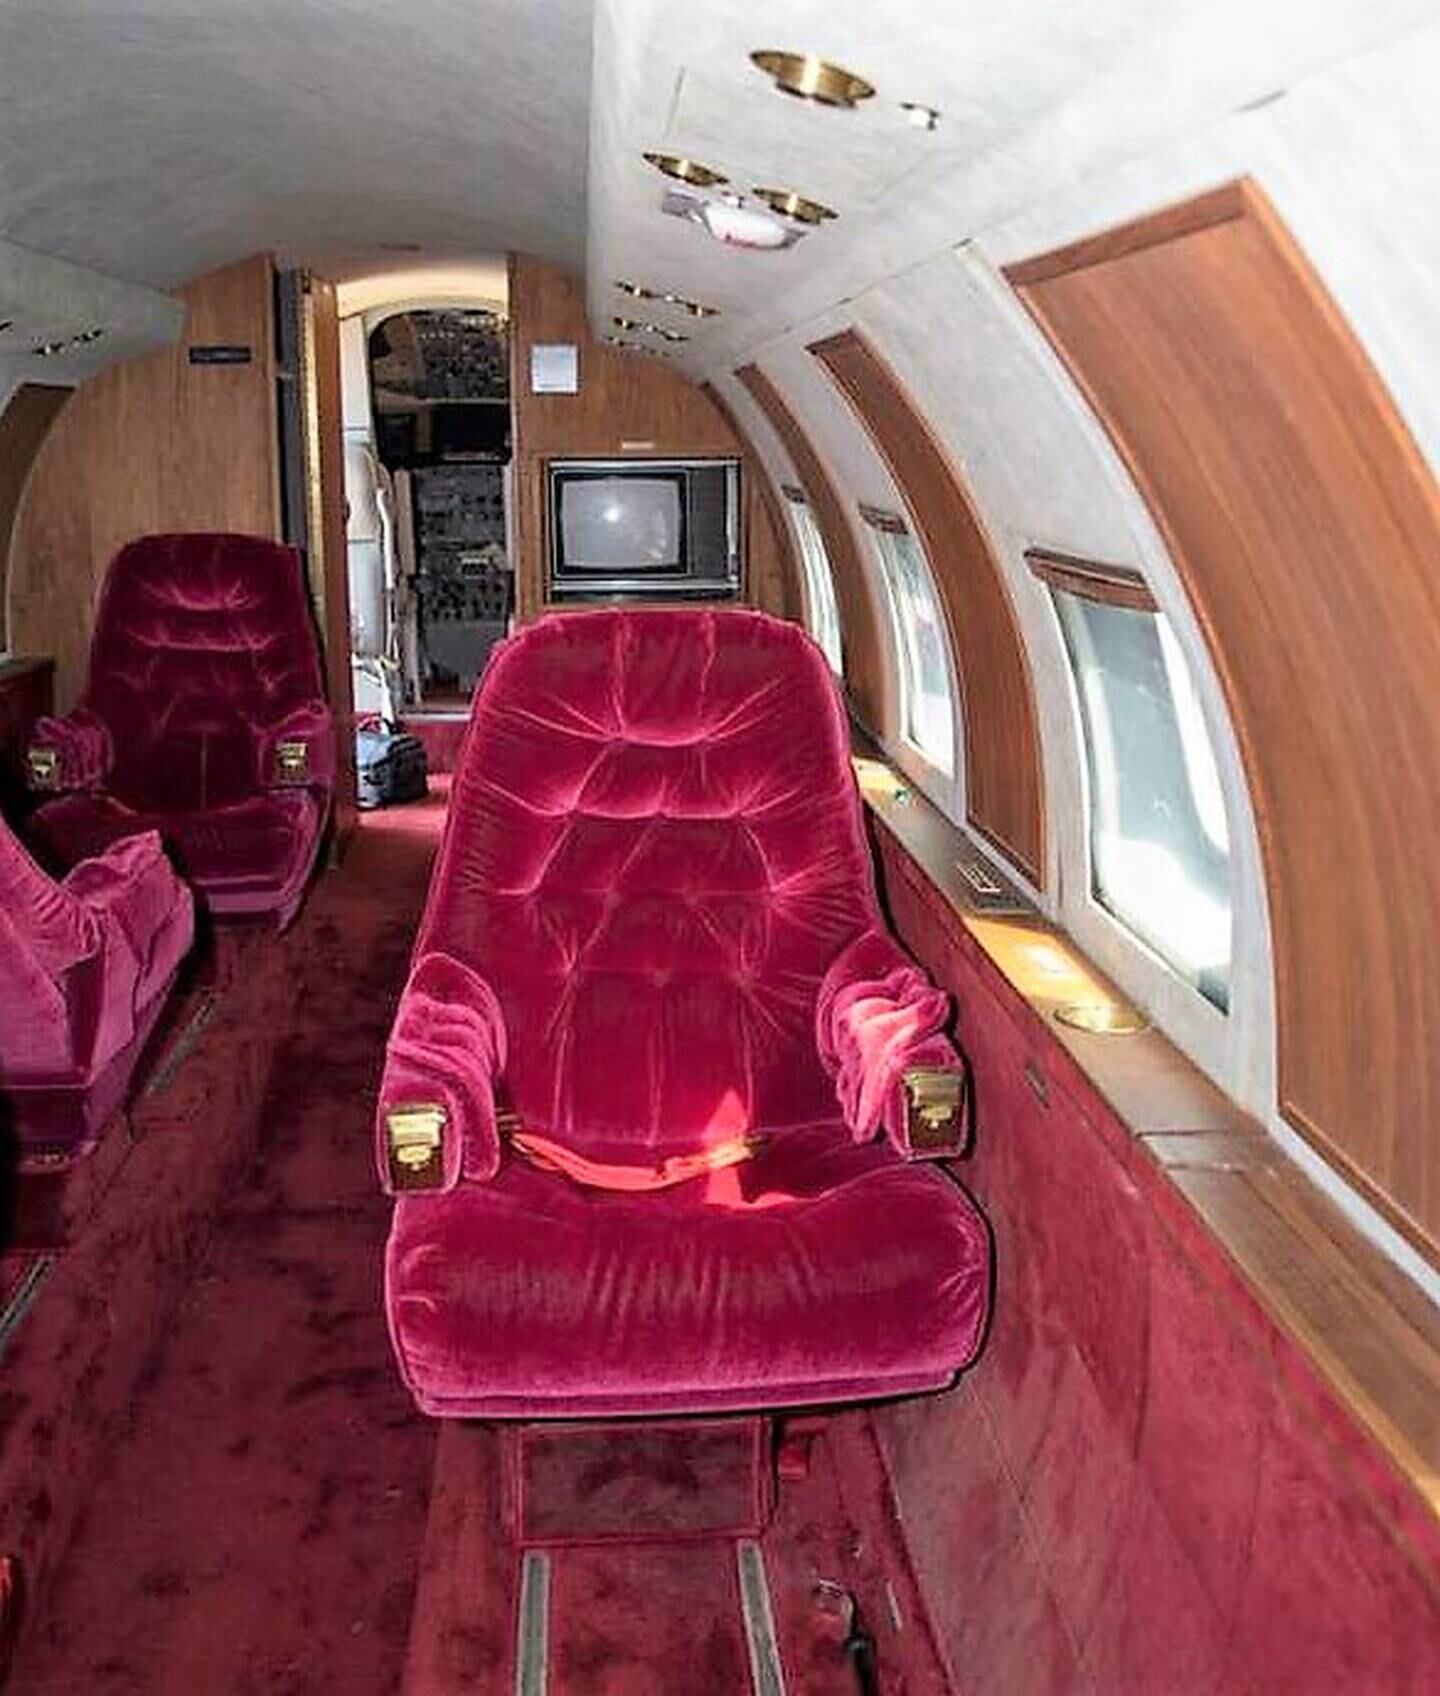 The interior has red velvet seats and original wood panelling details. Photo: GWS Auctions